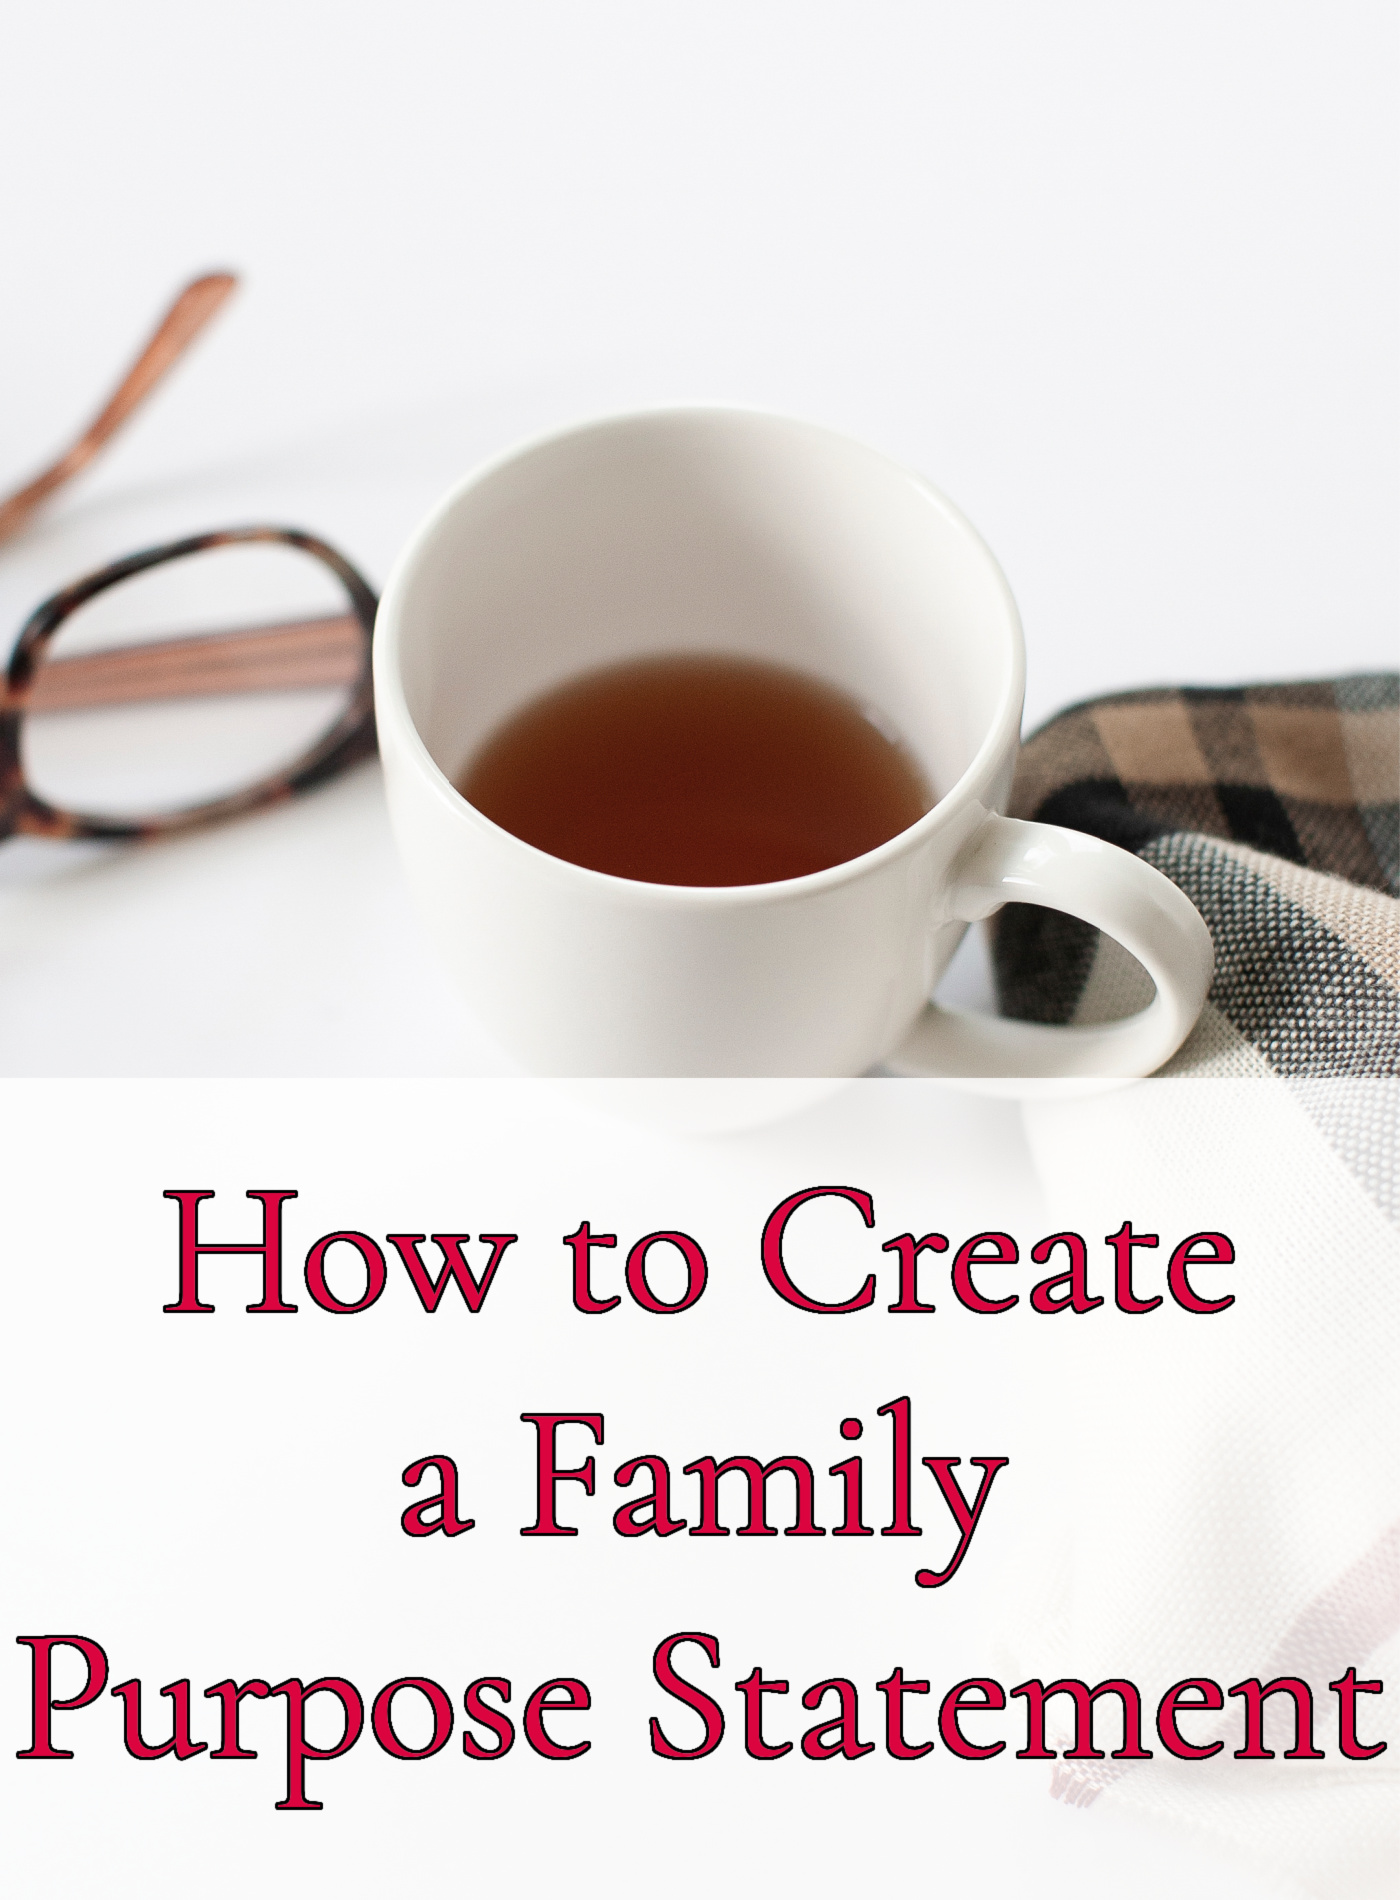 How to Create a Family Purpose Statement